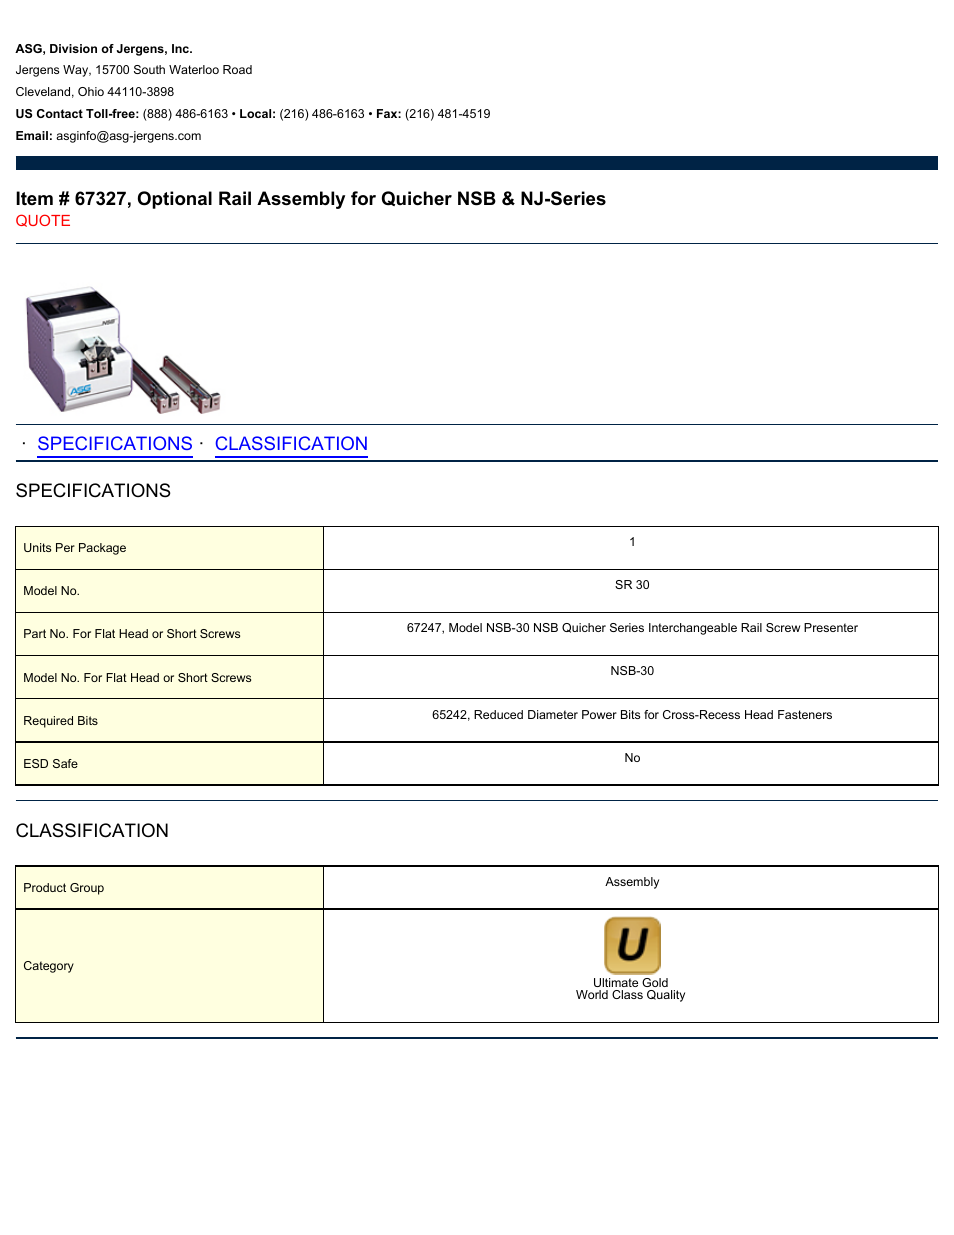 ASG Jergens 67327 Optional Rail Assembly for Quicher NSB & NJ-Series User Manual | 1 page